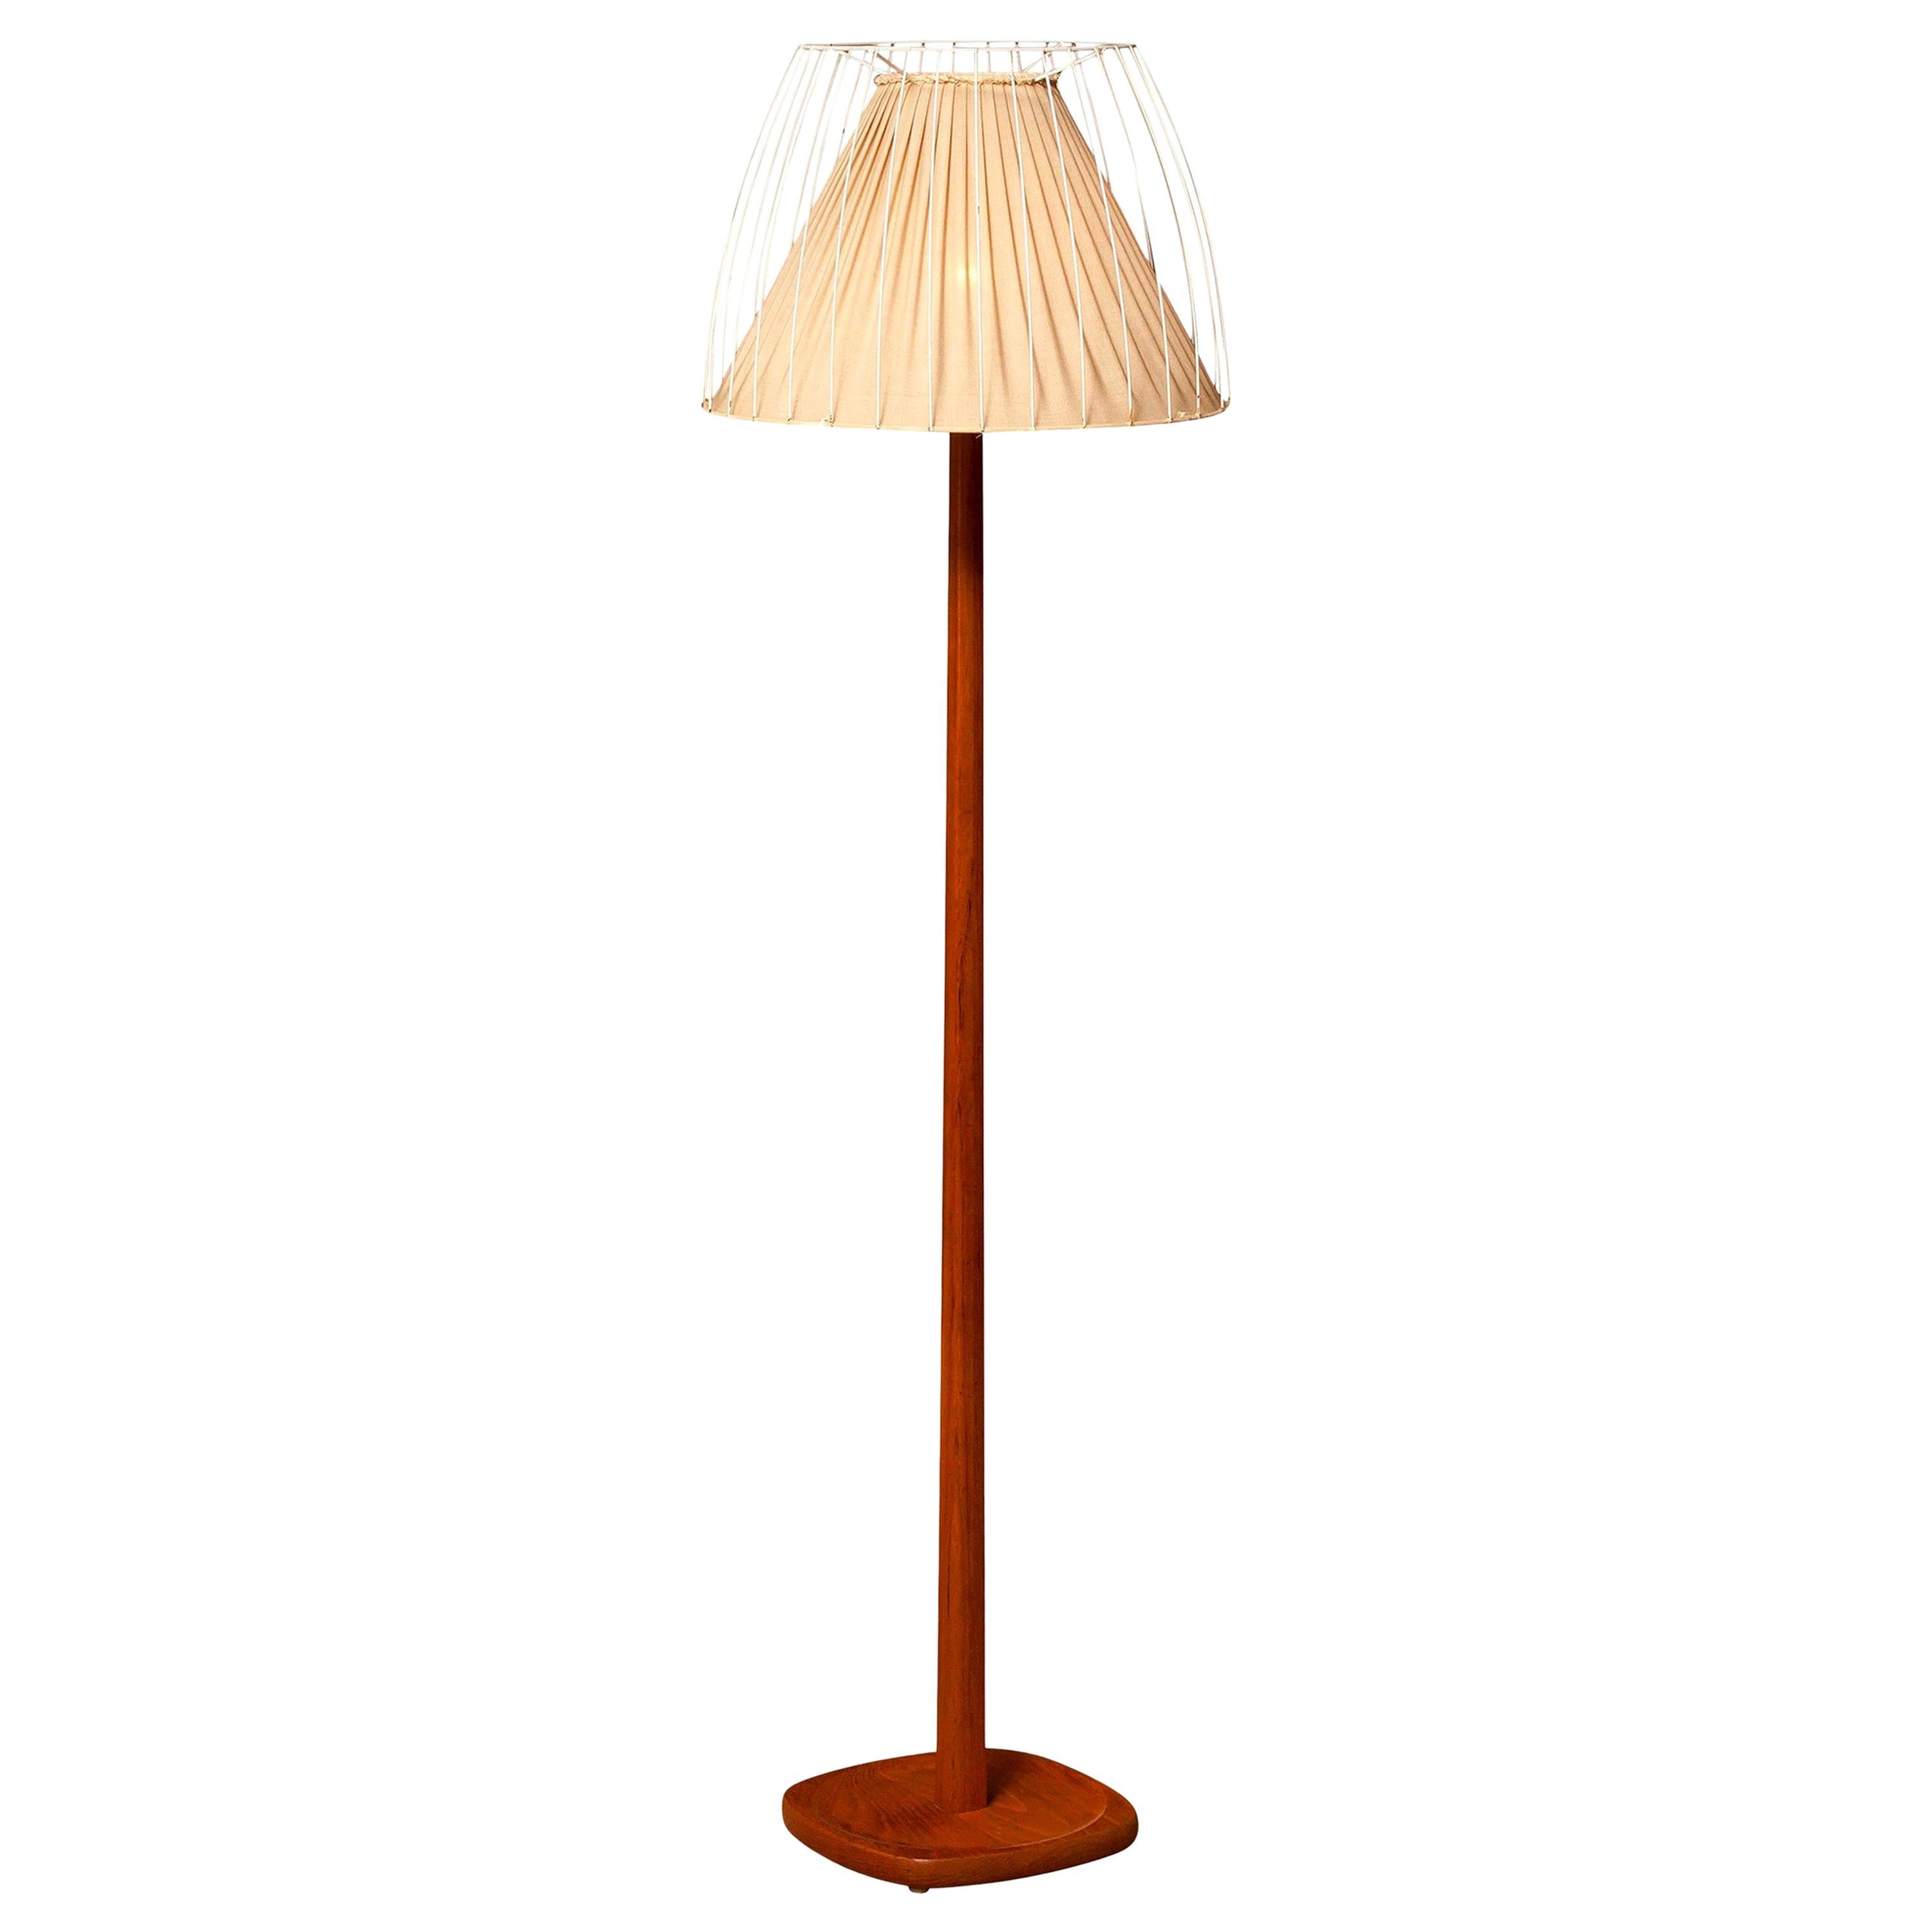 Very beautiful floor lamp made by Stilarmatur, Sweden.
This lamp has a wonderful shape shade that consists of a fabric shade on the inside and an open metal white lacquered shade on the outside on a very nice teak stand.
It is in a nice and